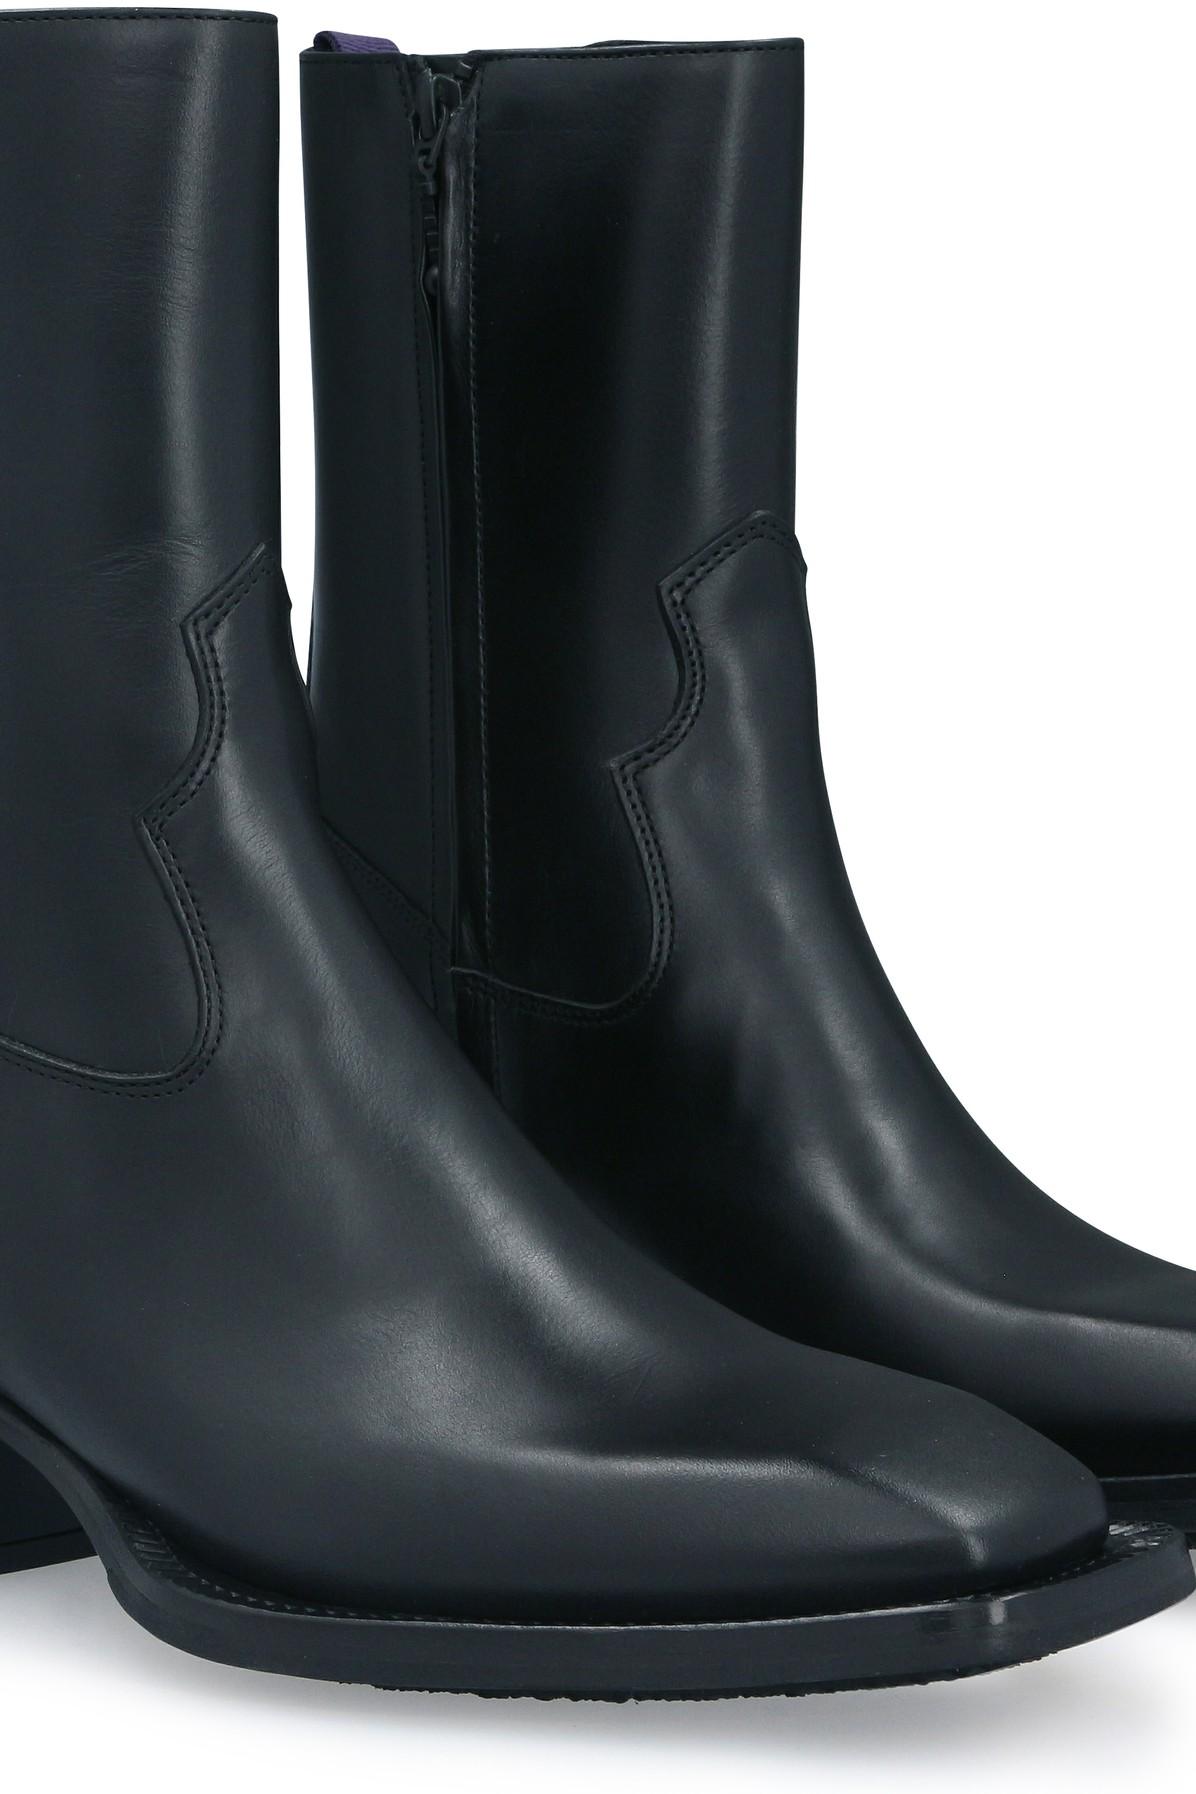 Eytys Leather Luciano Boots in Black | Lyst